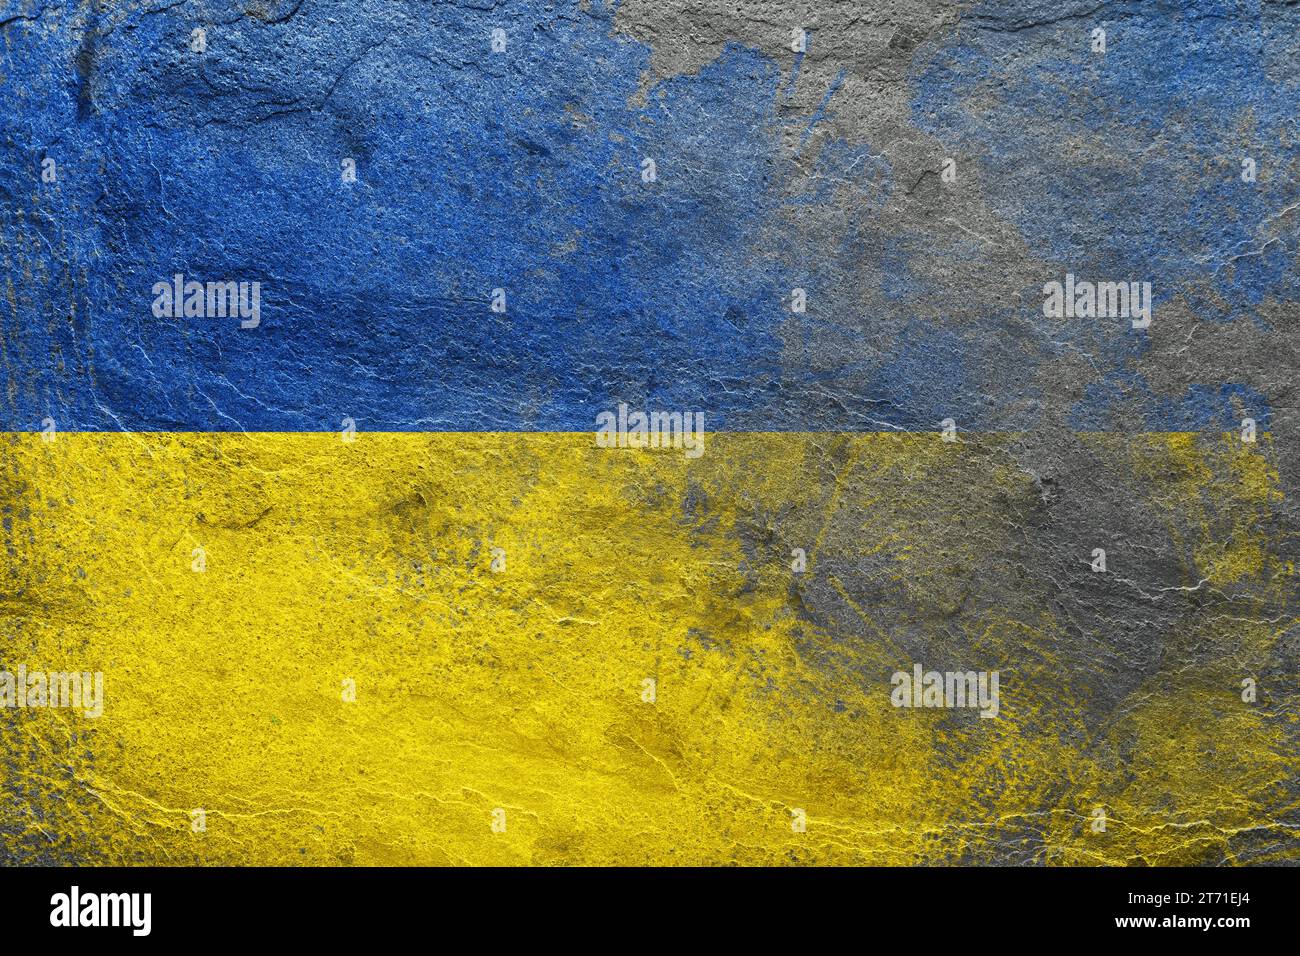 National flag of Ukraine painted on textured surface Stock Photo